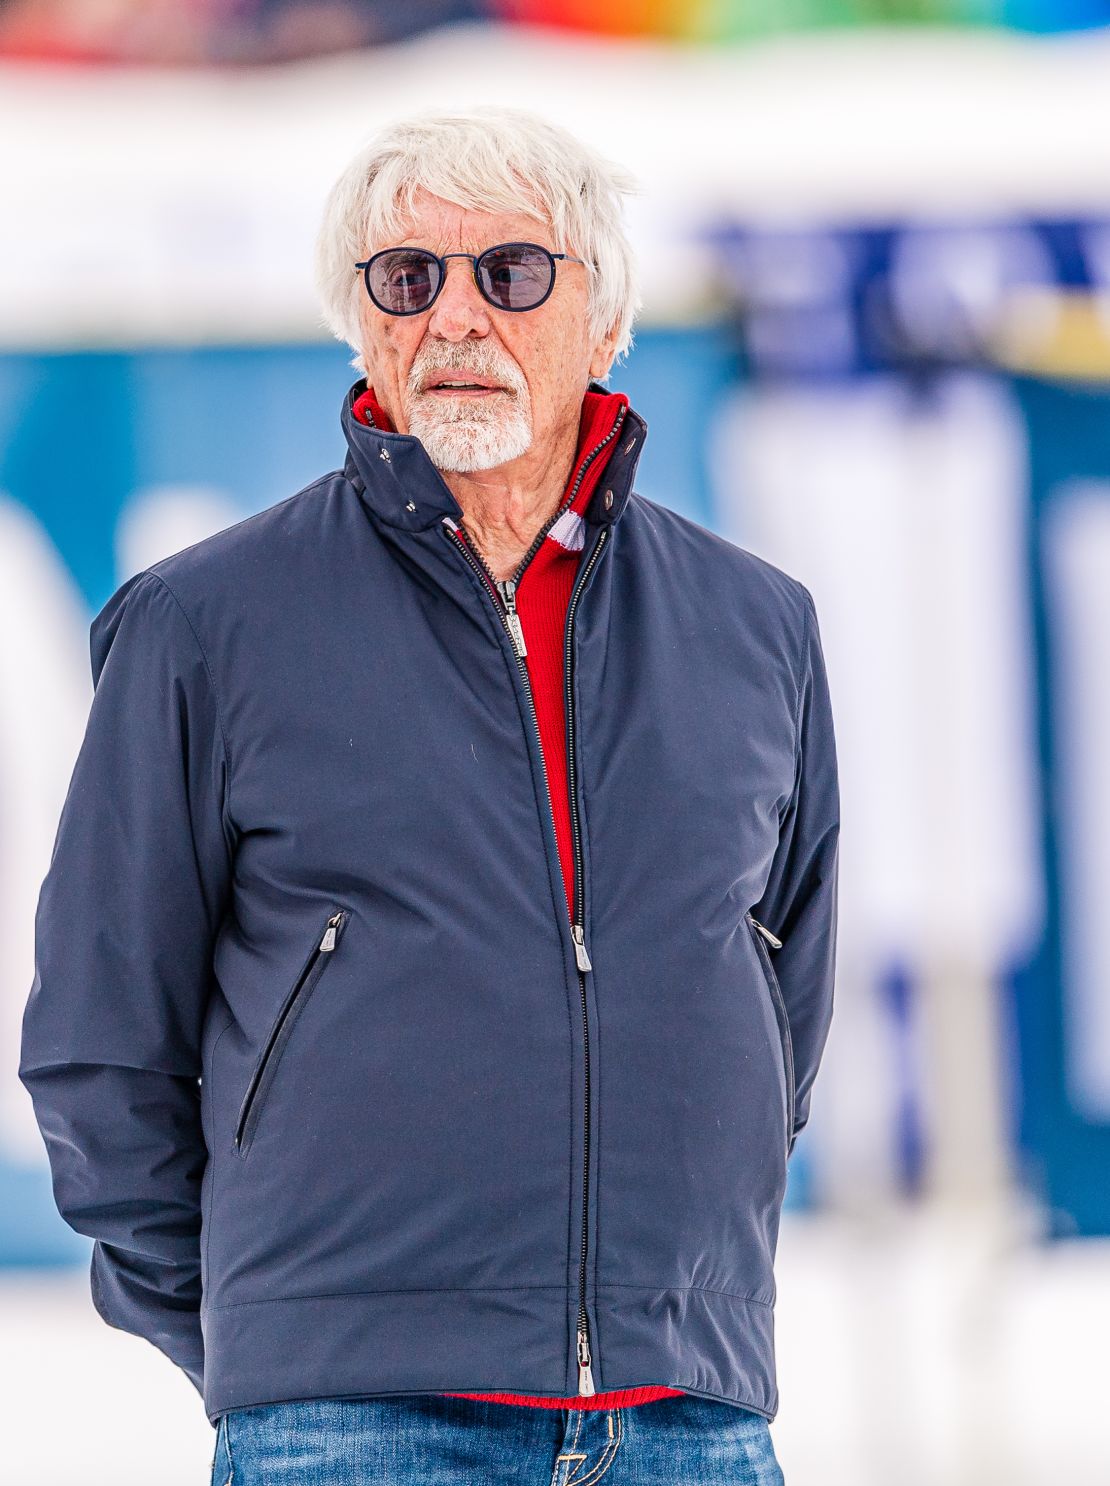 Bernie Ecclestone is seen during the KitzCharityTrophy 2020 sideline event at the FIS Alpine Ski World Cup in Kitzbuehel, Austria, on January 25, 2020.